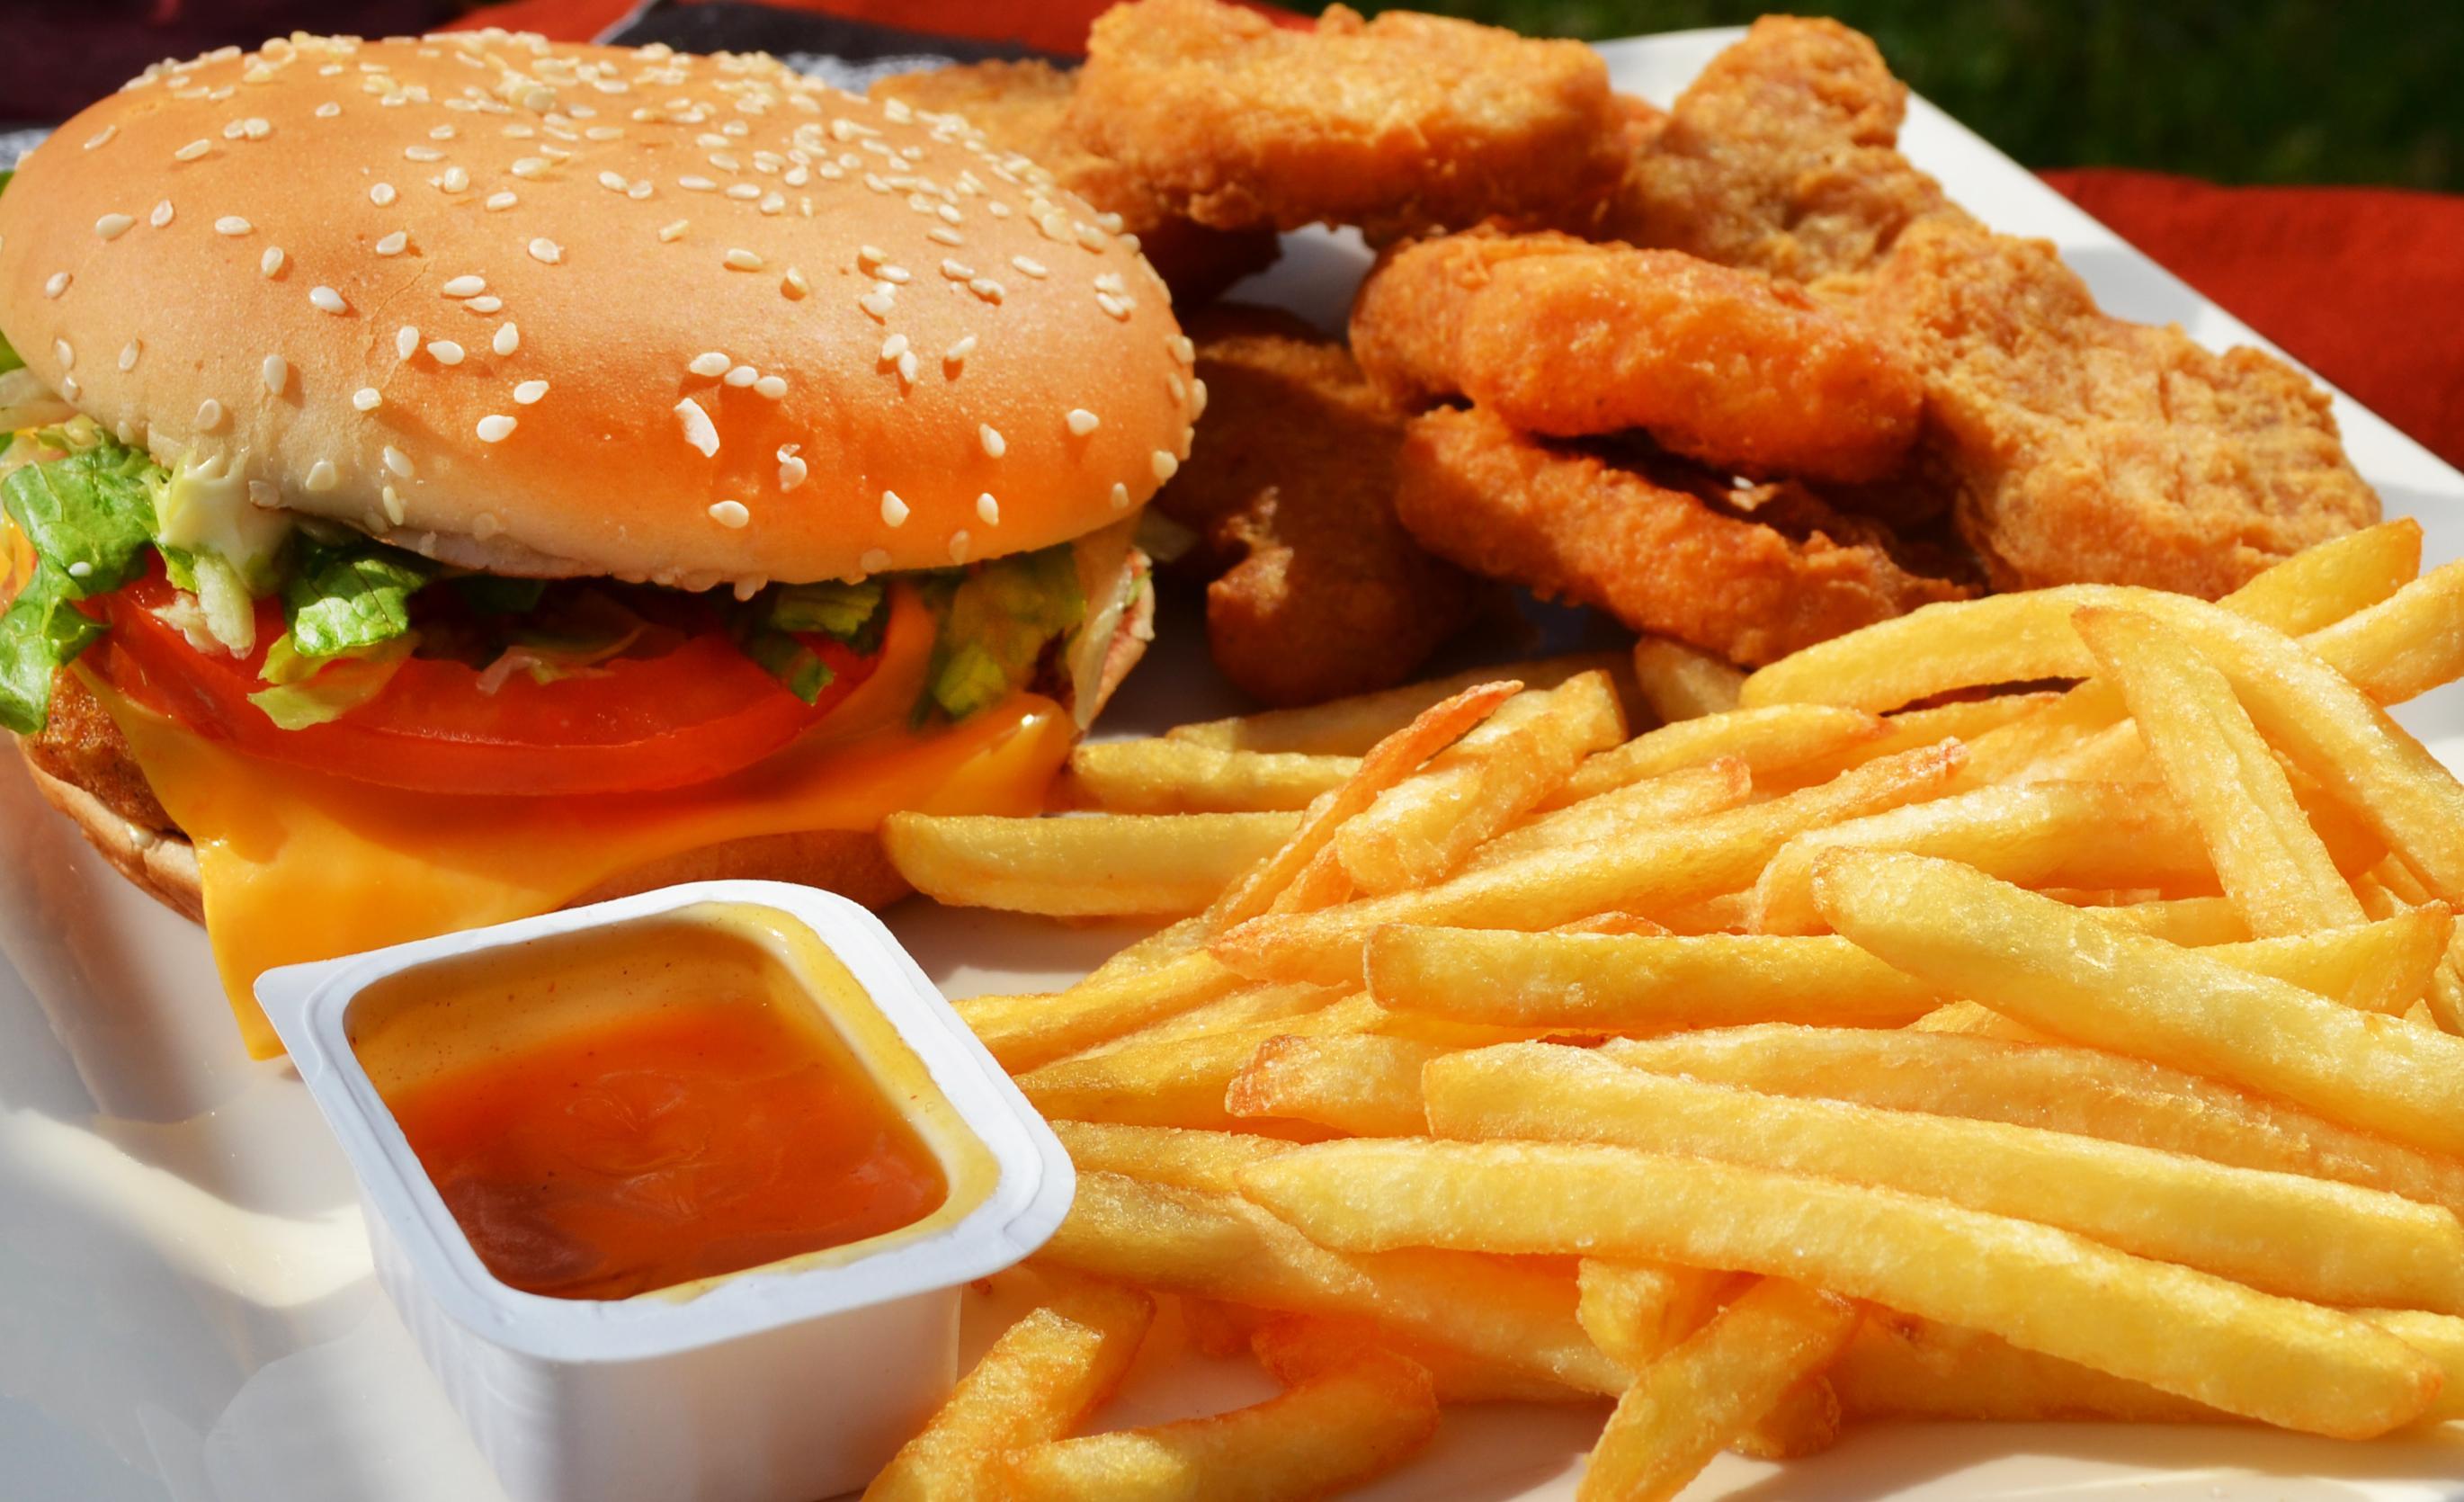 Fast Food on a Tray # 2740x1670. All For Desktop